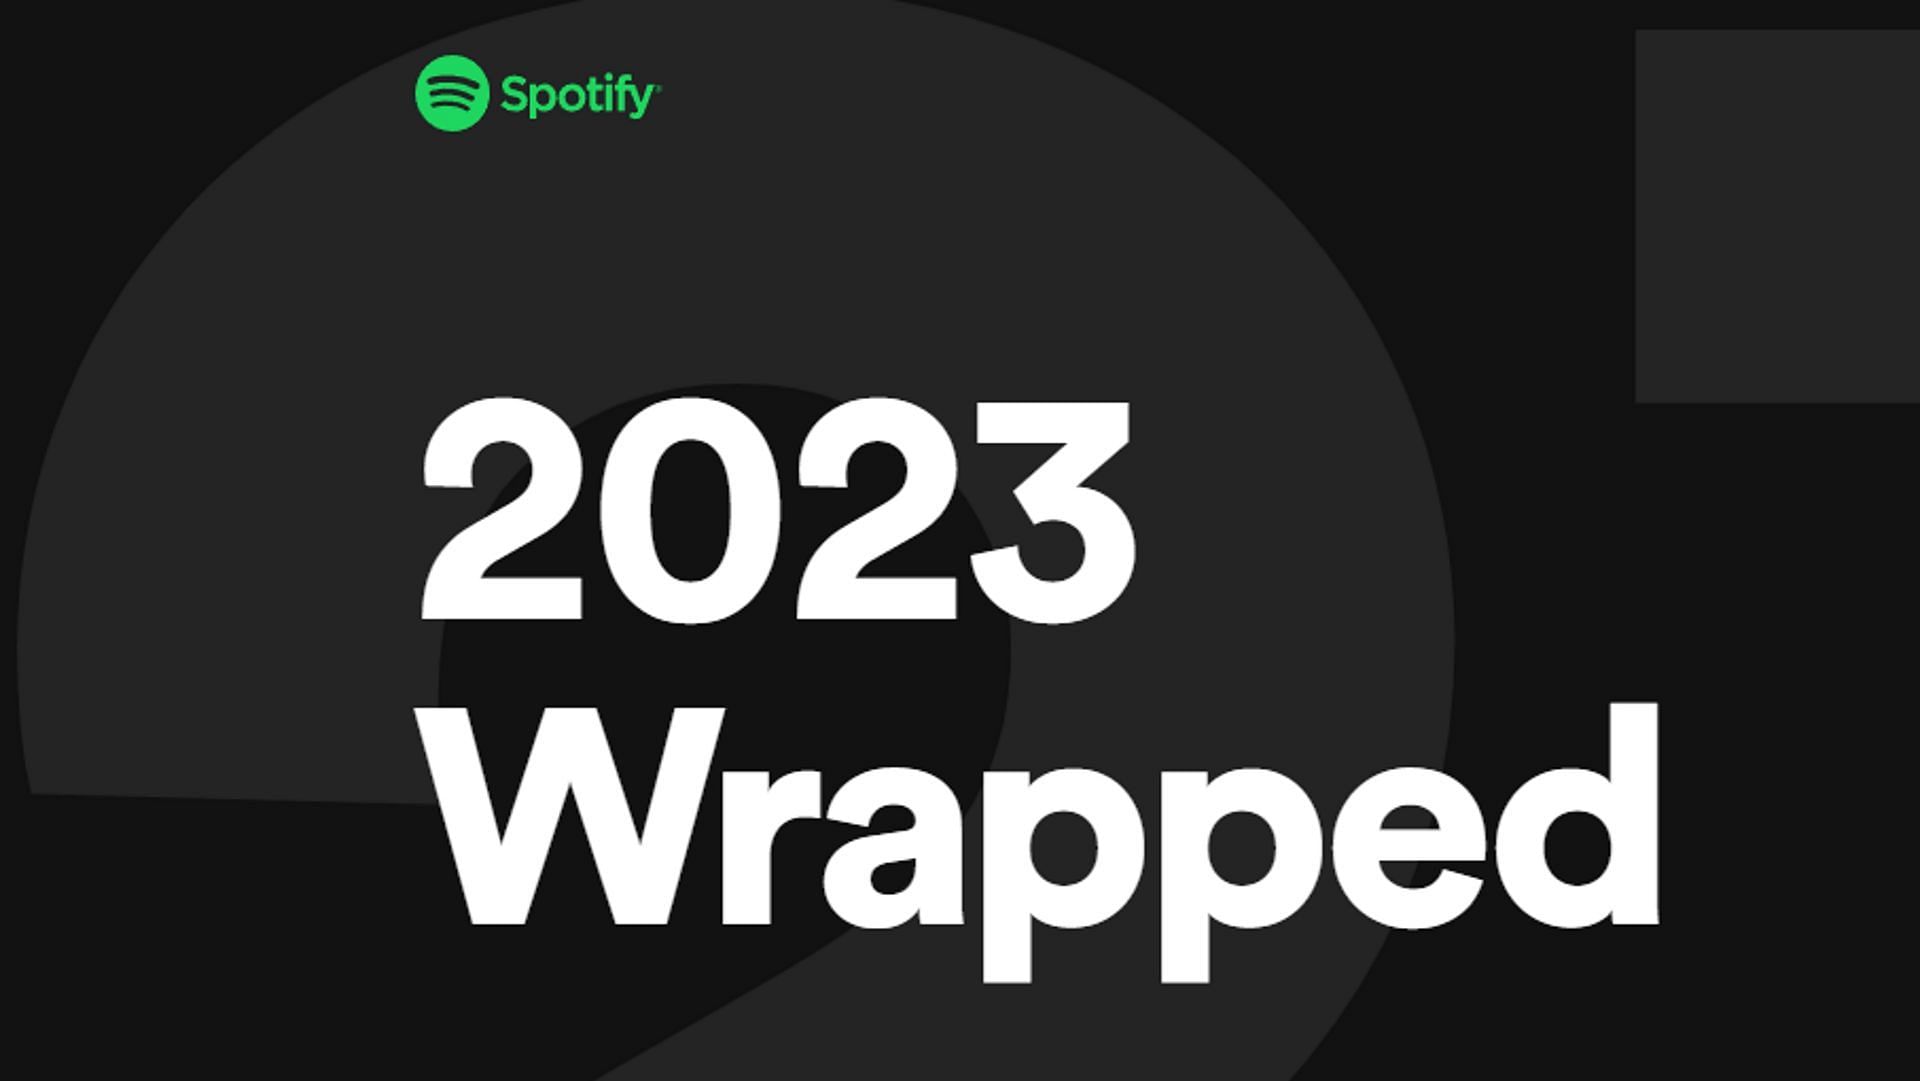 Spotify Wrapped 2023 expected date, time, what to expect, and more